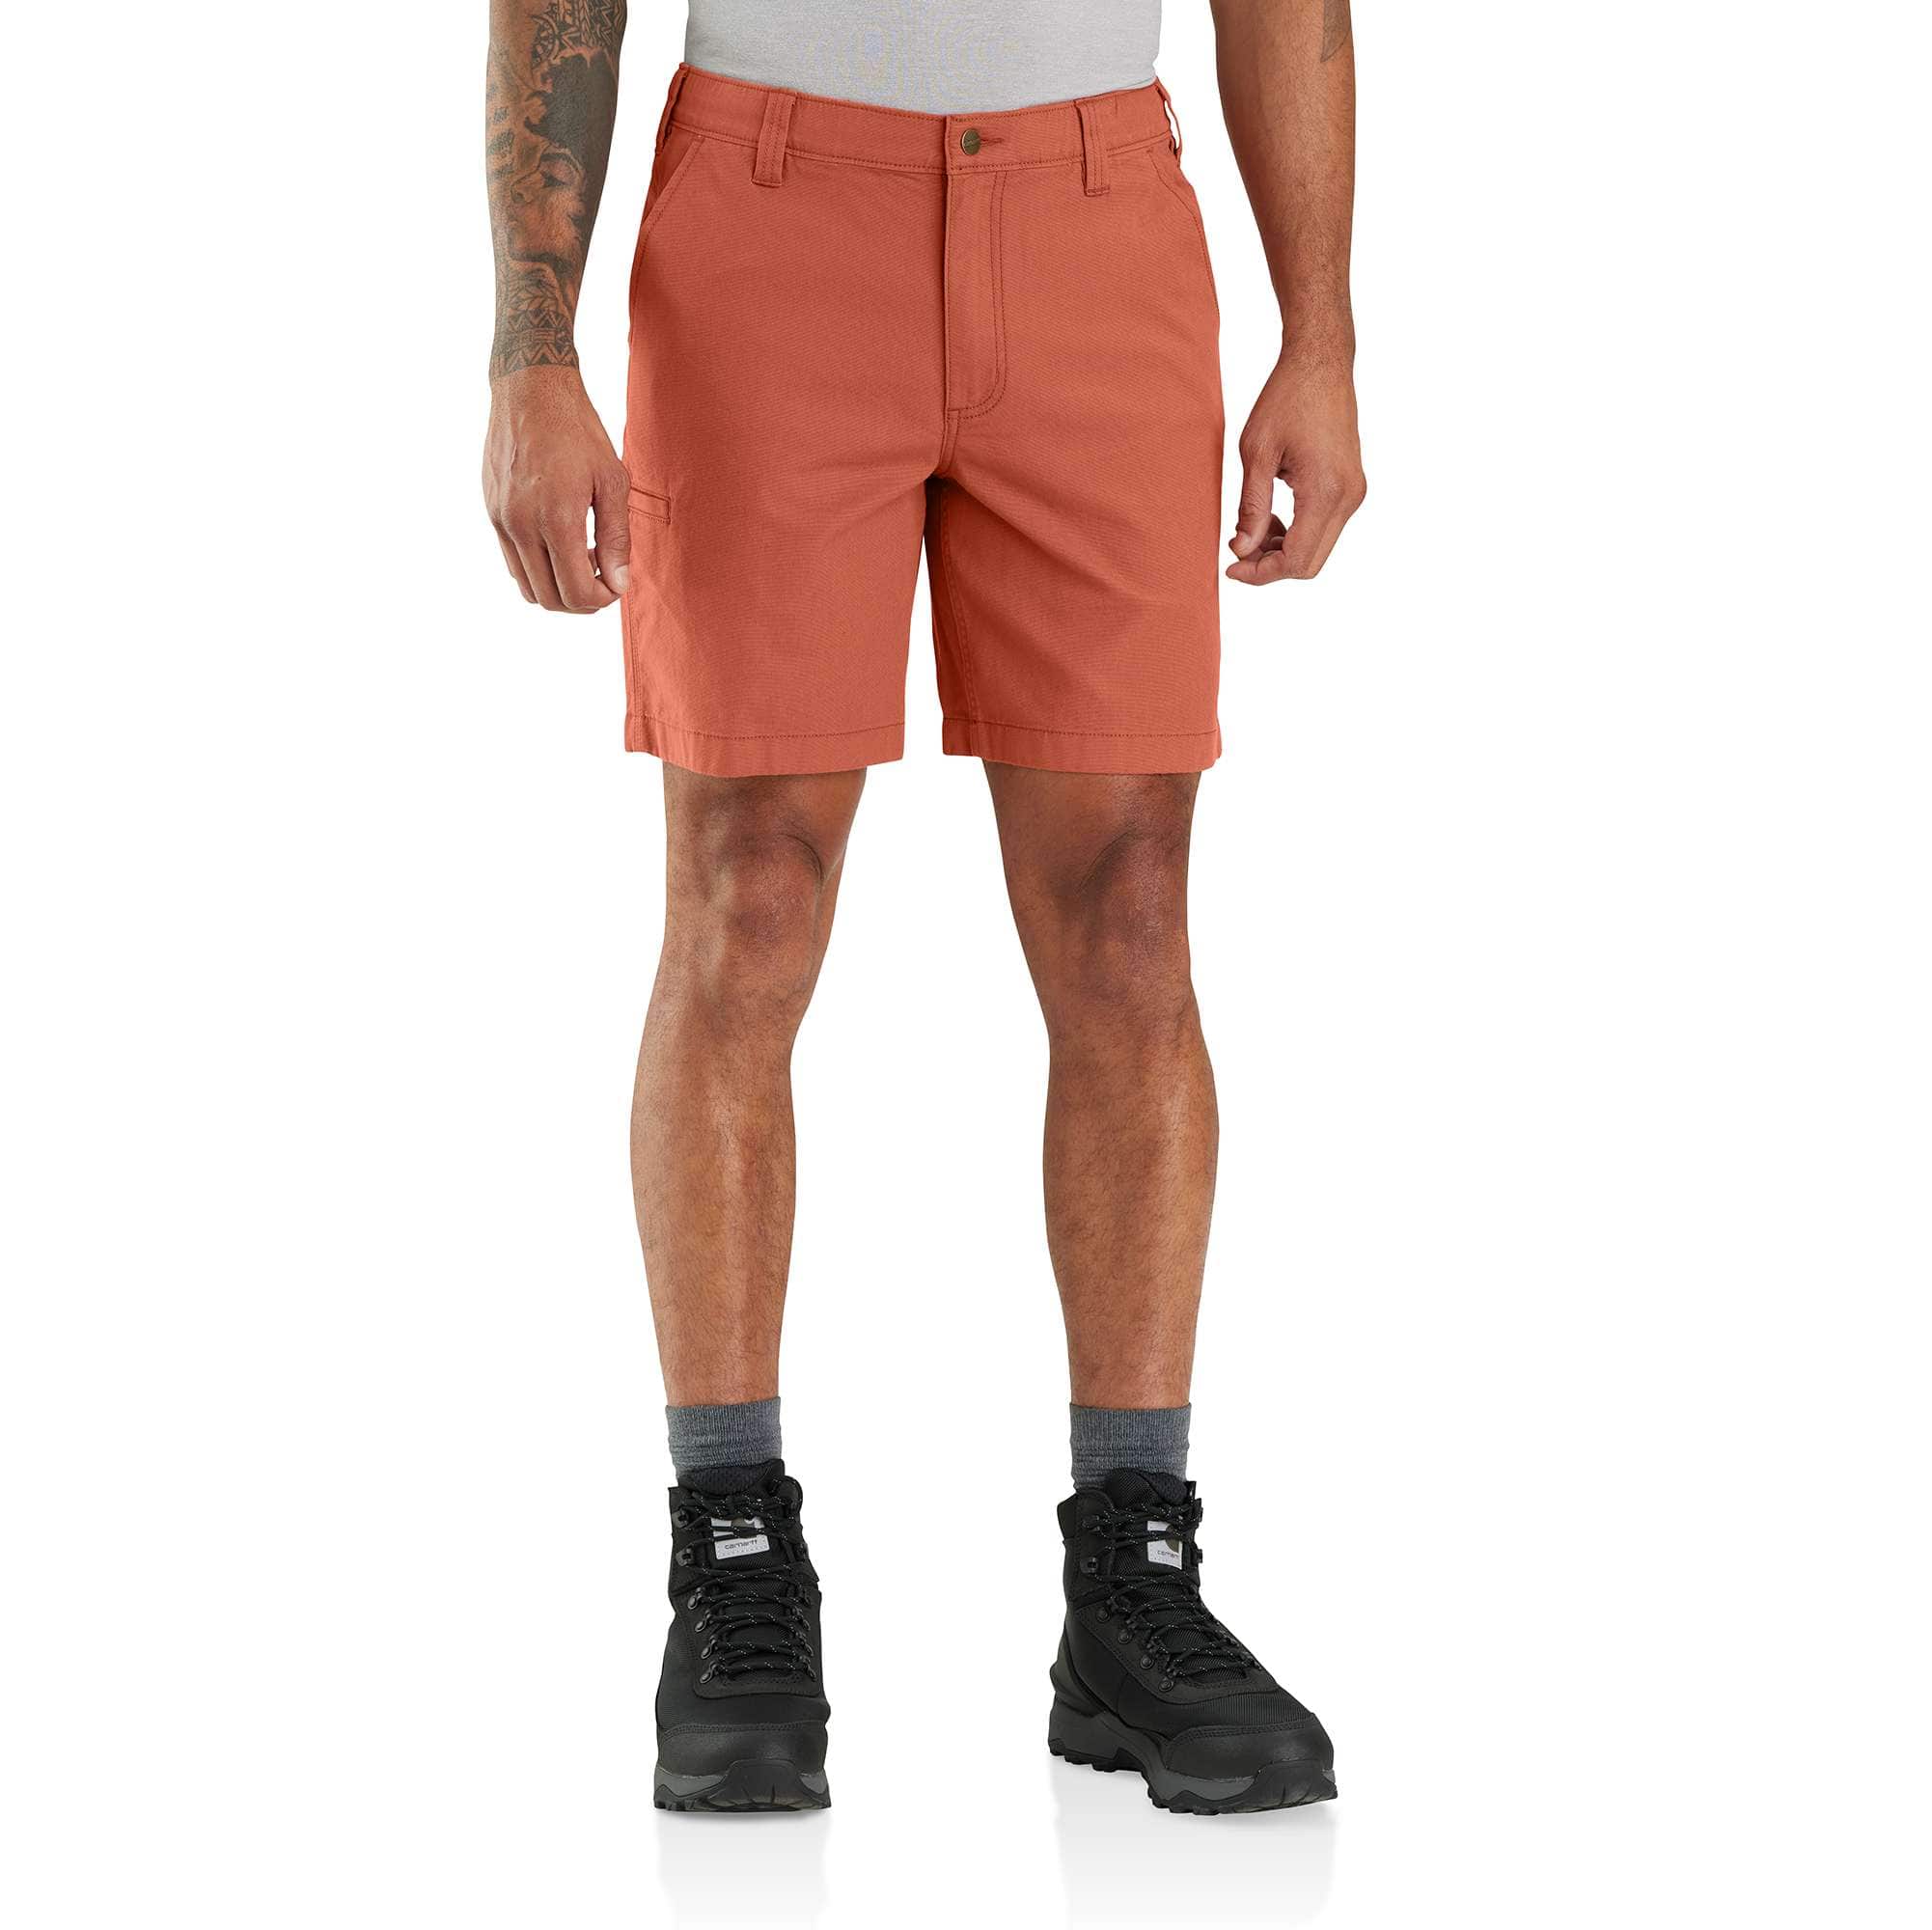 Relaxed Fit Worker shorts - Black/Patterned - Men